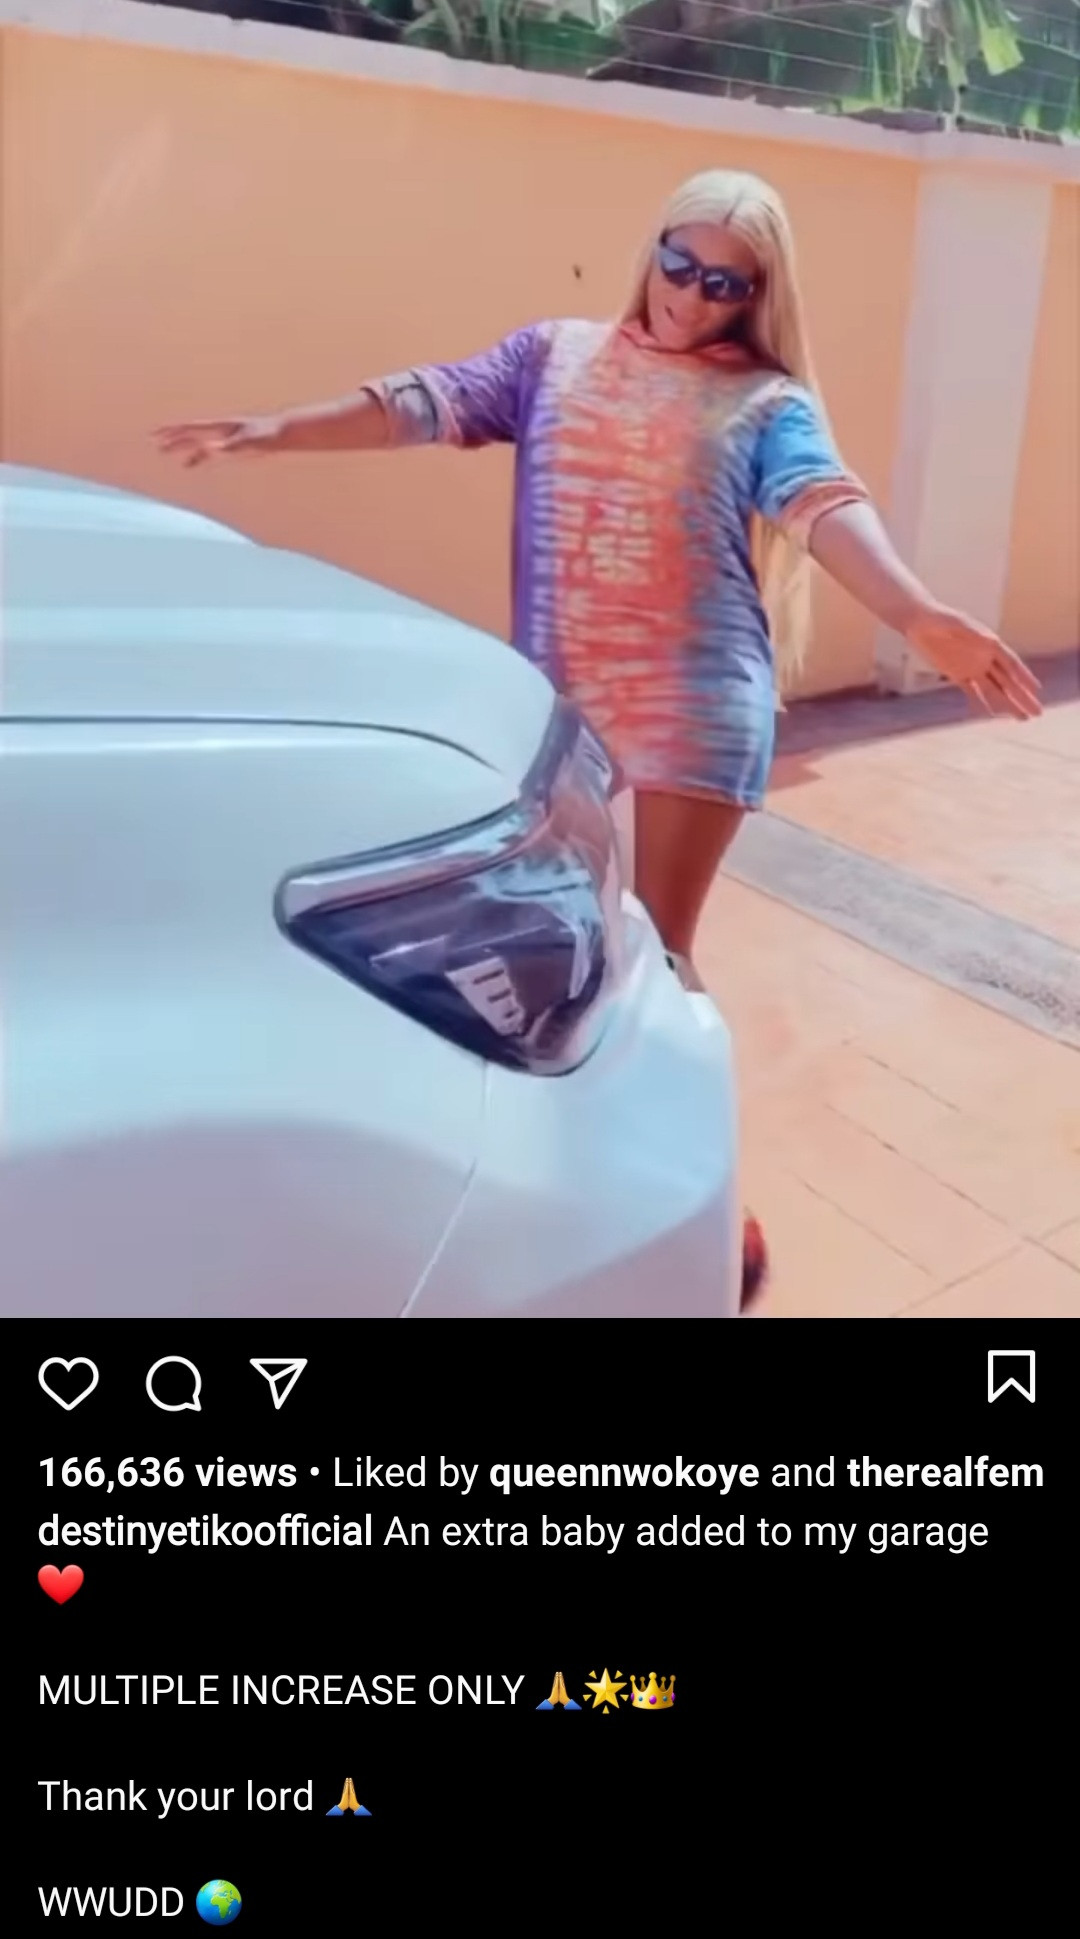 "An extra baby added to my garage" Actress, Destiny Etiko shows off her newest car (video)